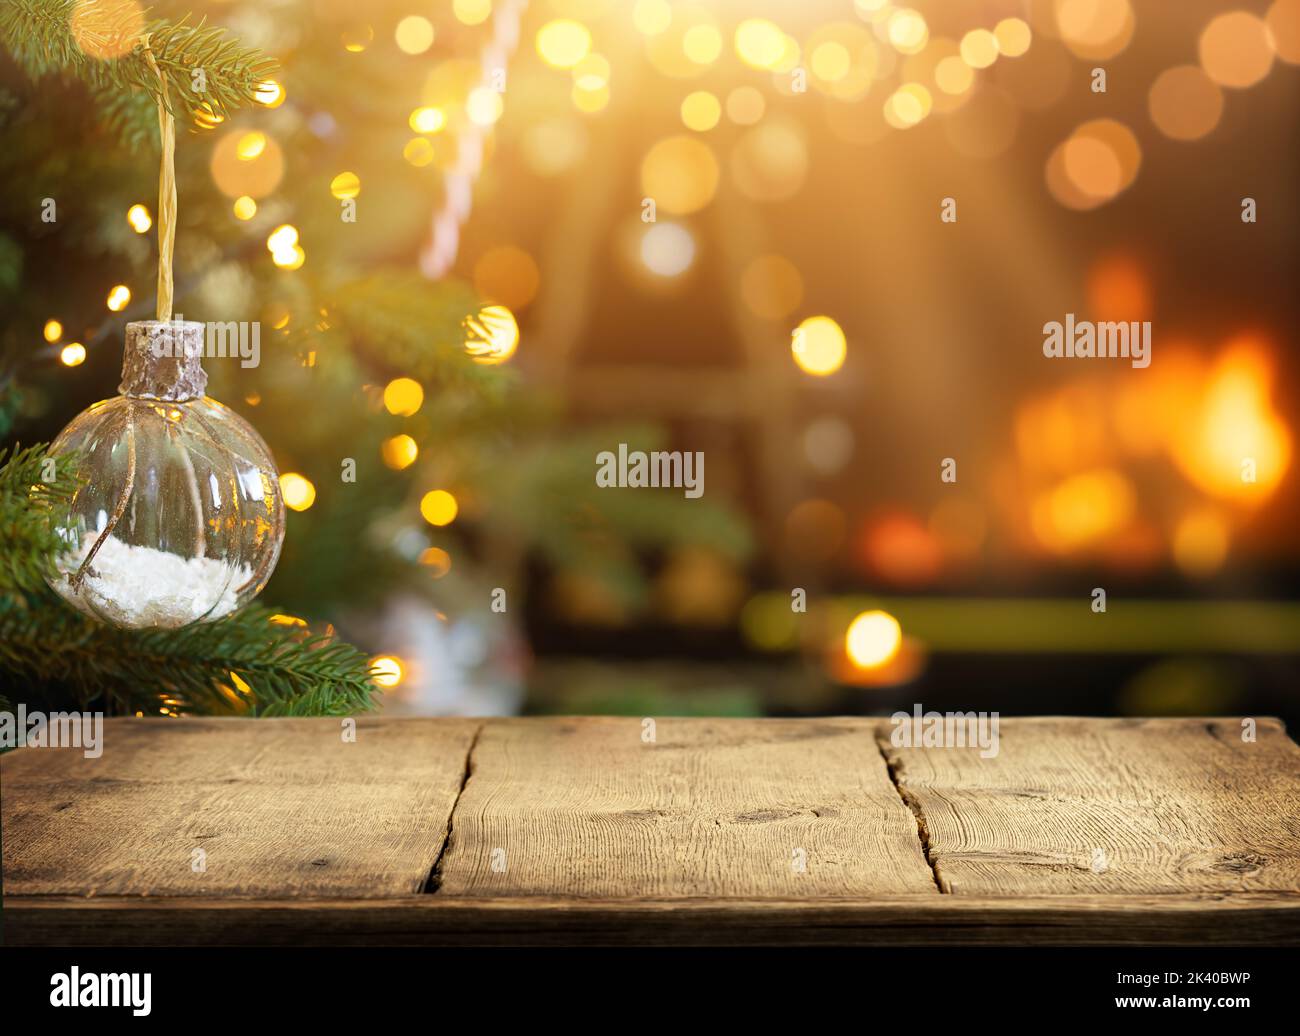 Empty wooden table on Christmas ornaments background with fireplace. Copy space. Stock Photo